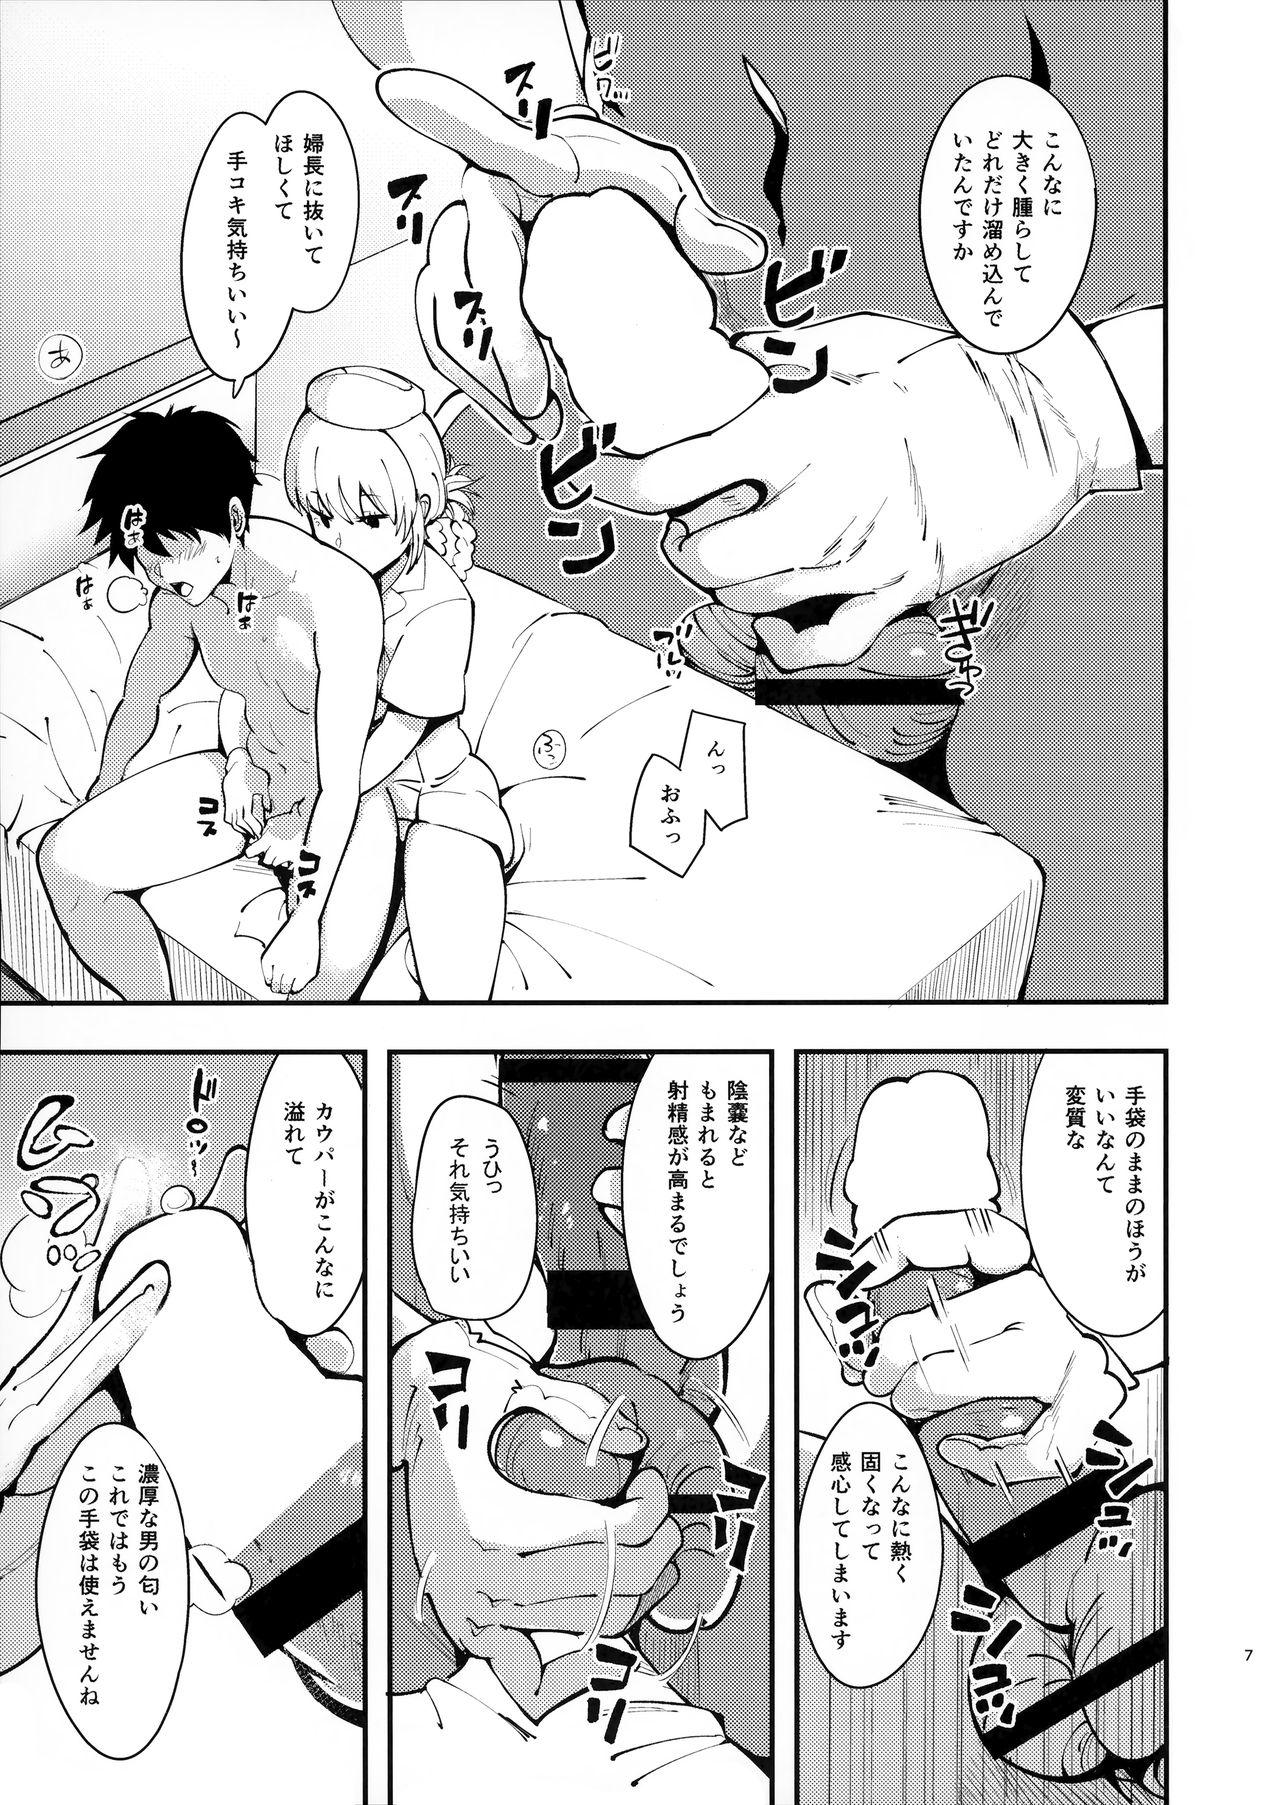 Tribbing Dreamin' Nightingale - Fate grand order Soapy Massage - Page 6